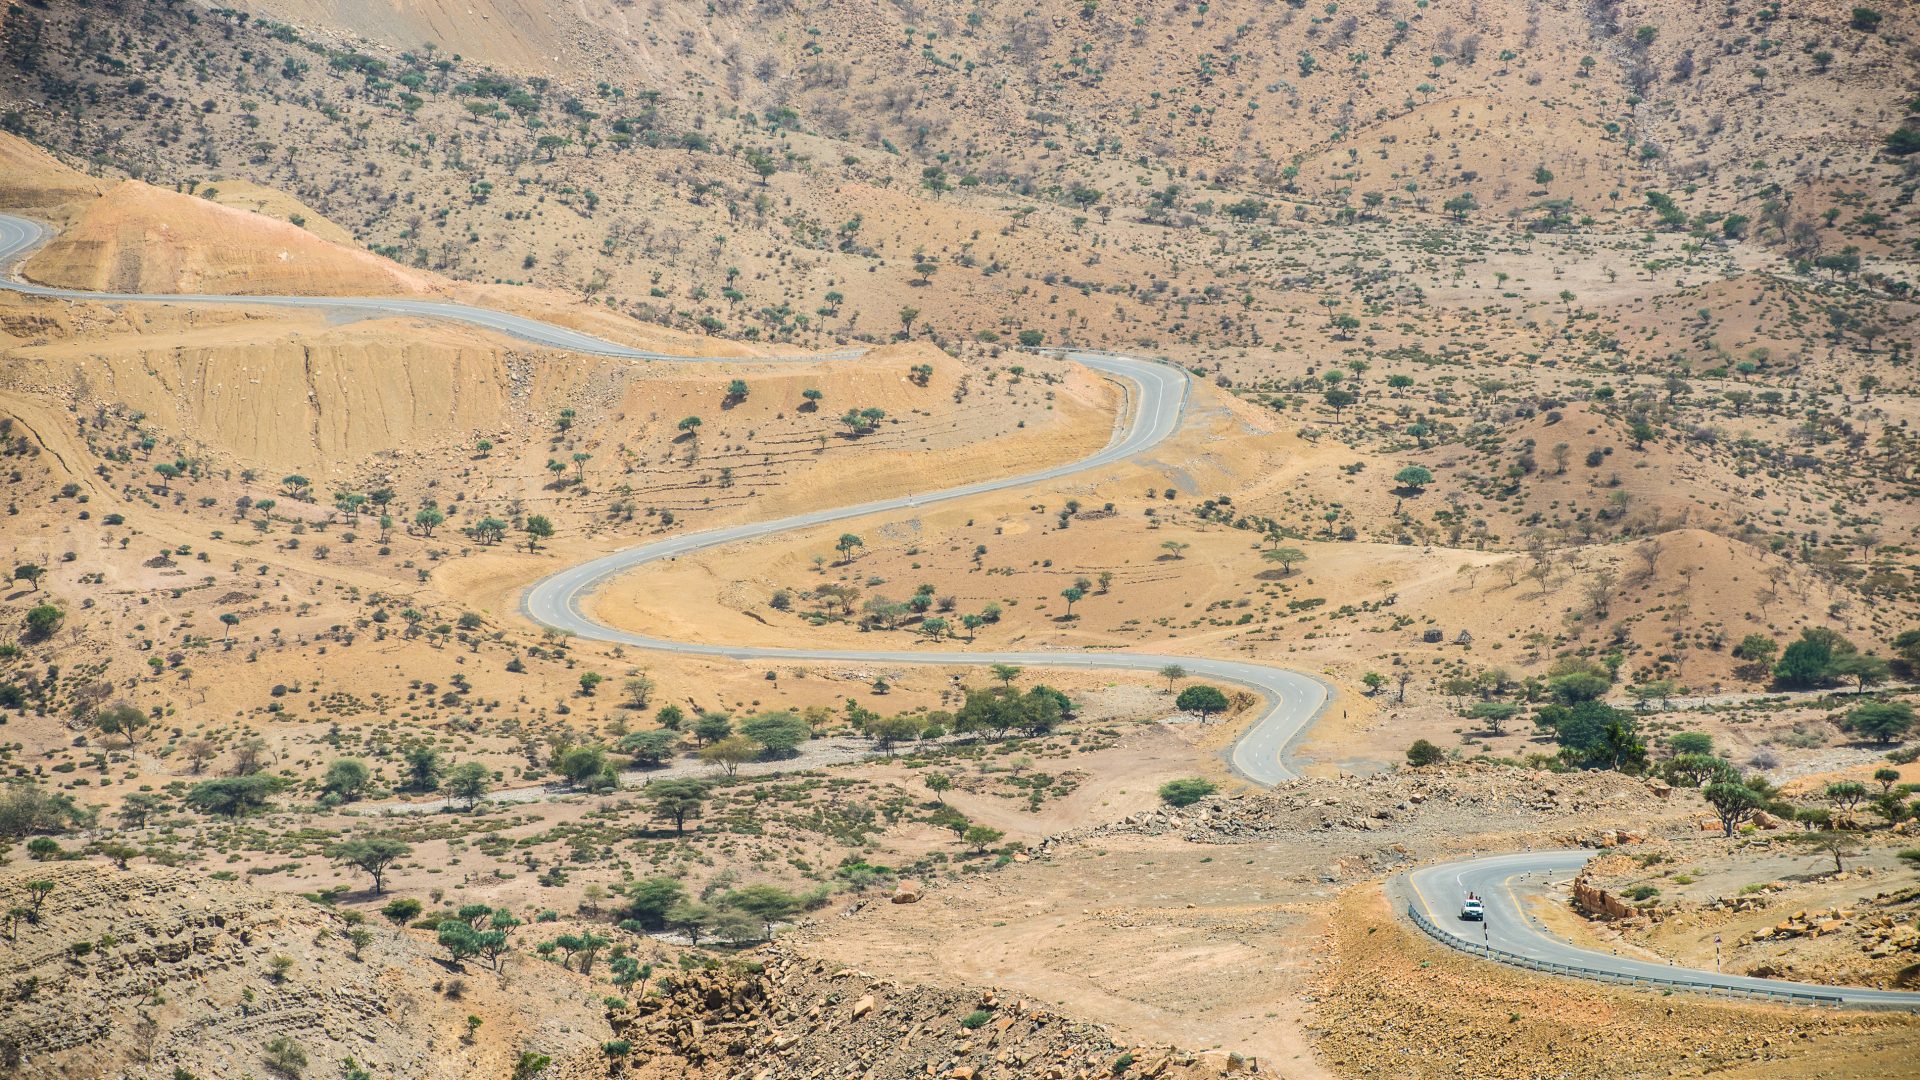 A road winds its way though barren hills interspersed with green trees, in the Danakil Depression, Ethiopia.